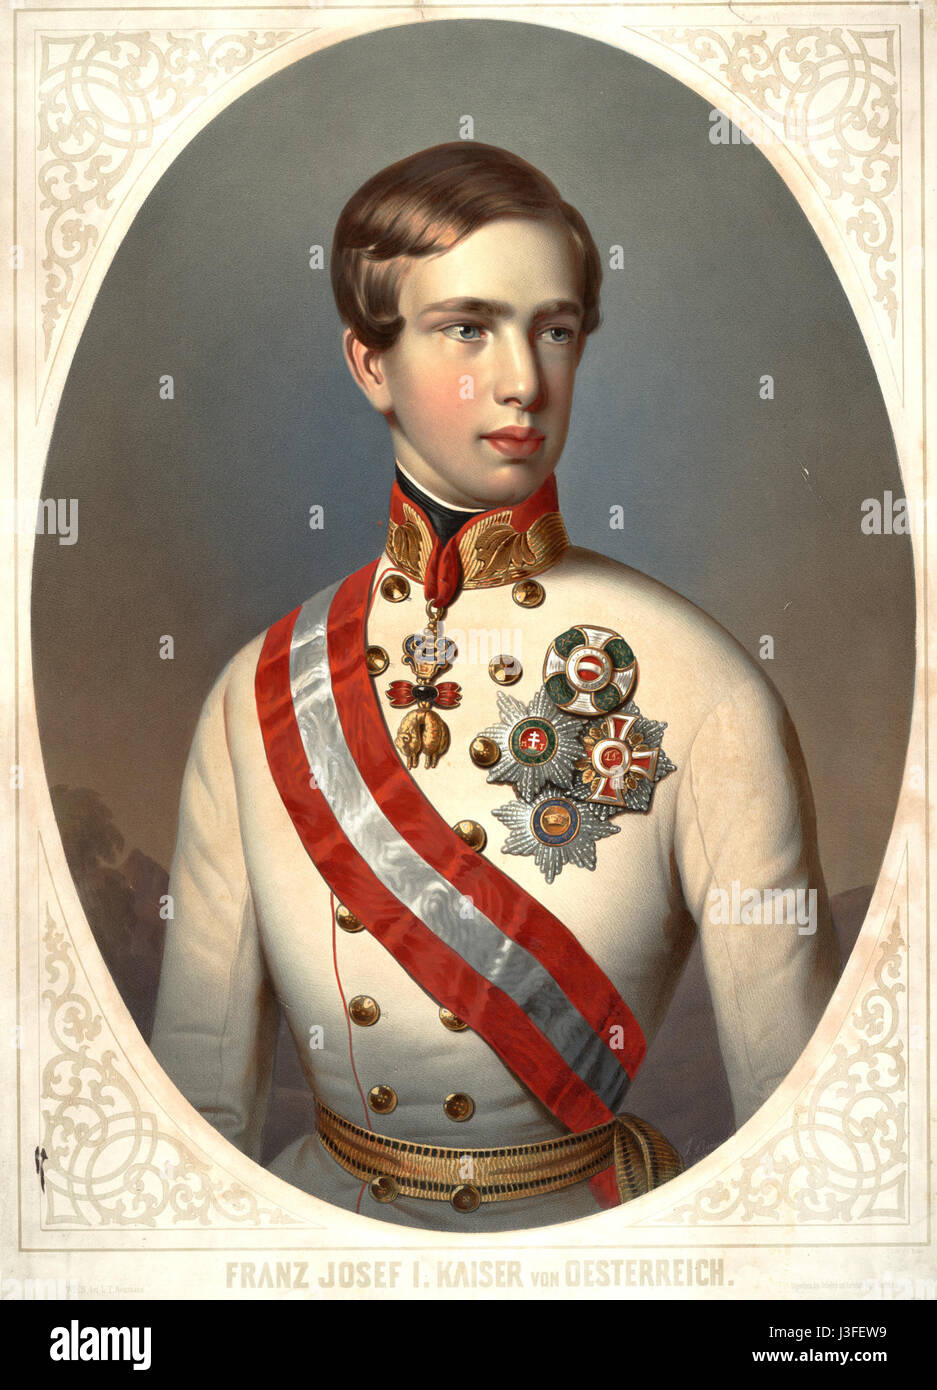 Franz Joseph I of Austria Bauer color lithograph by and after Bauer, dated 1848 by artist; oval bust portrait in uniform and orders Stock Photo